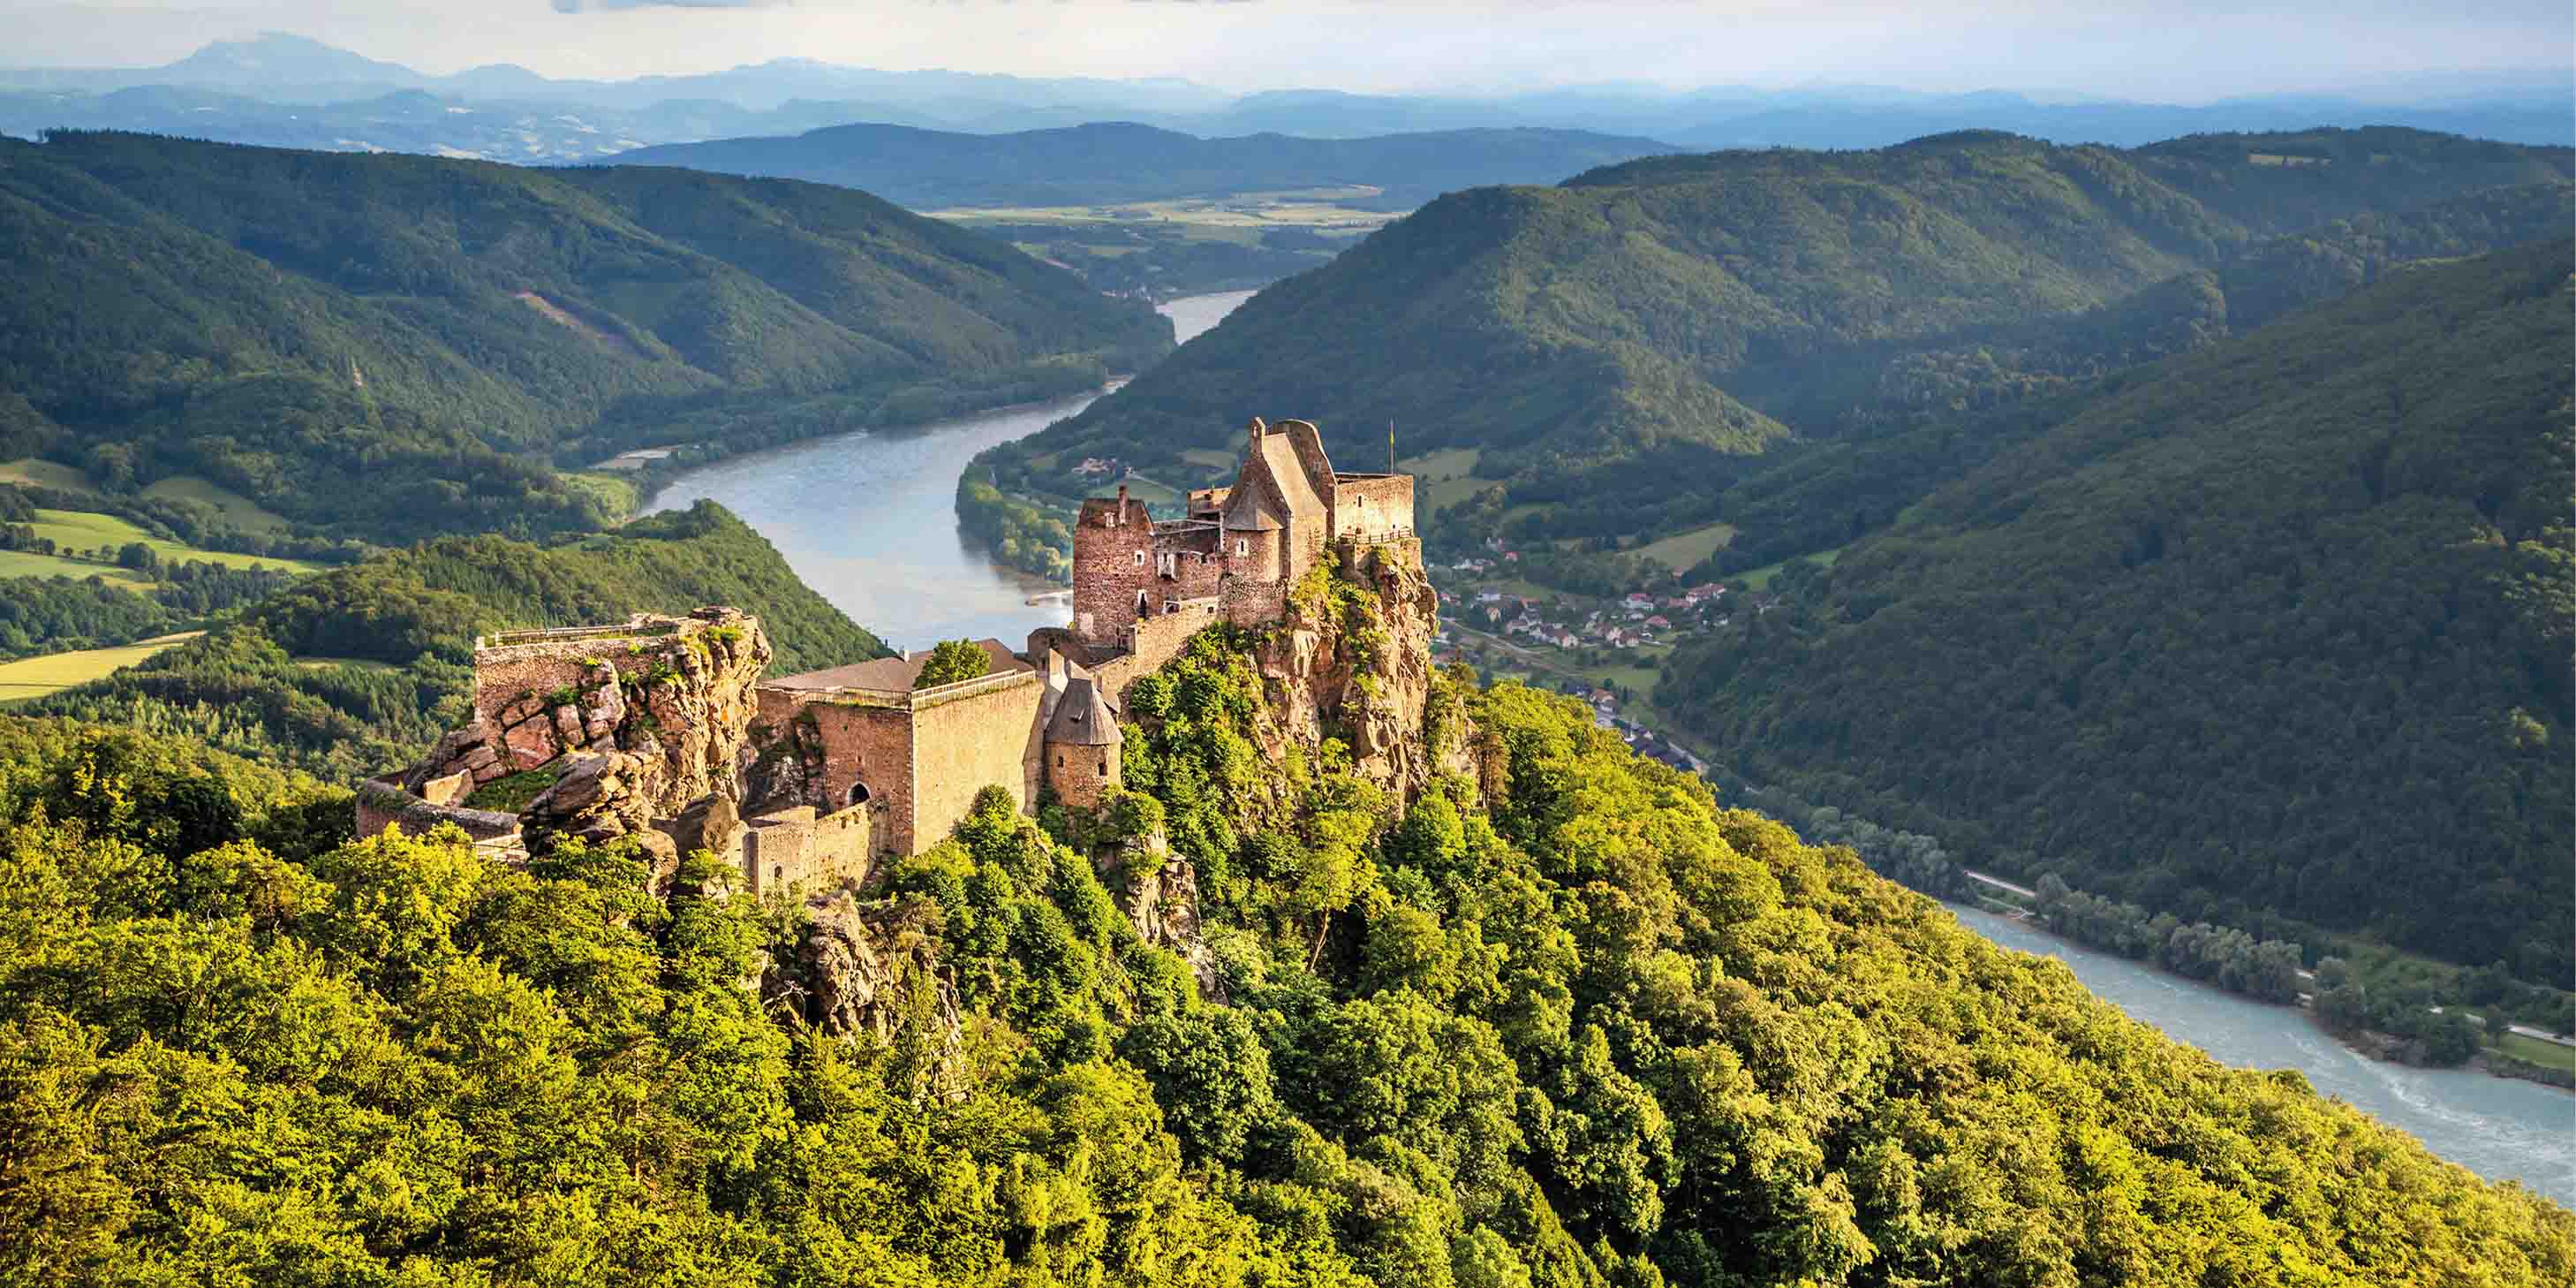 Durnstein Castle on top of a green hill in the Wachau Valley of Austria on the banks of the Danube River